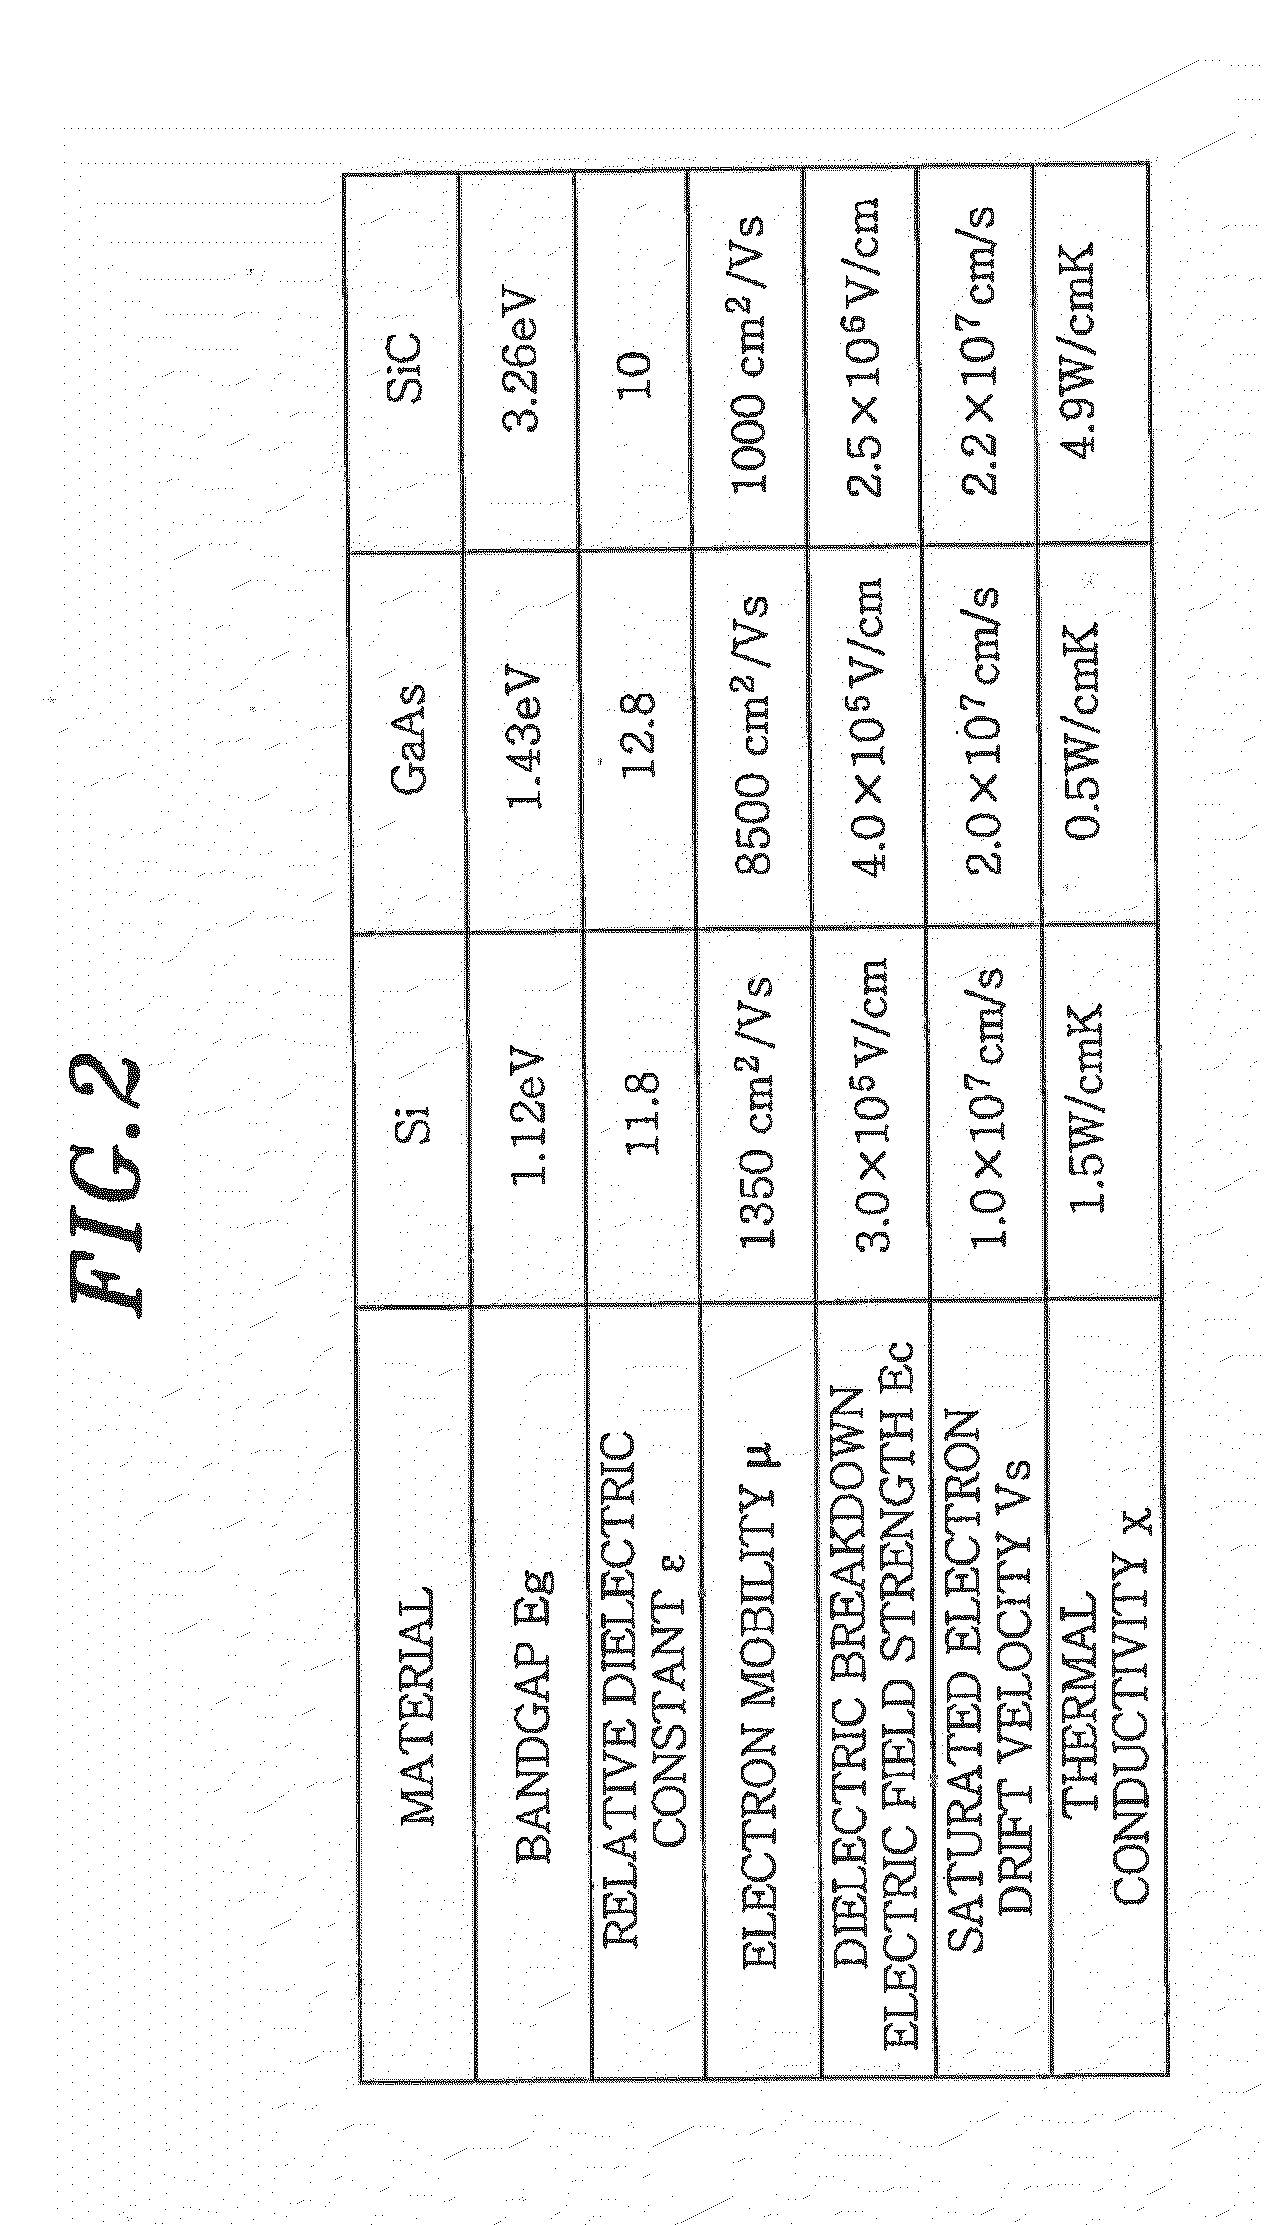 Film forming apparatus and method